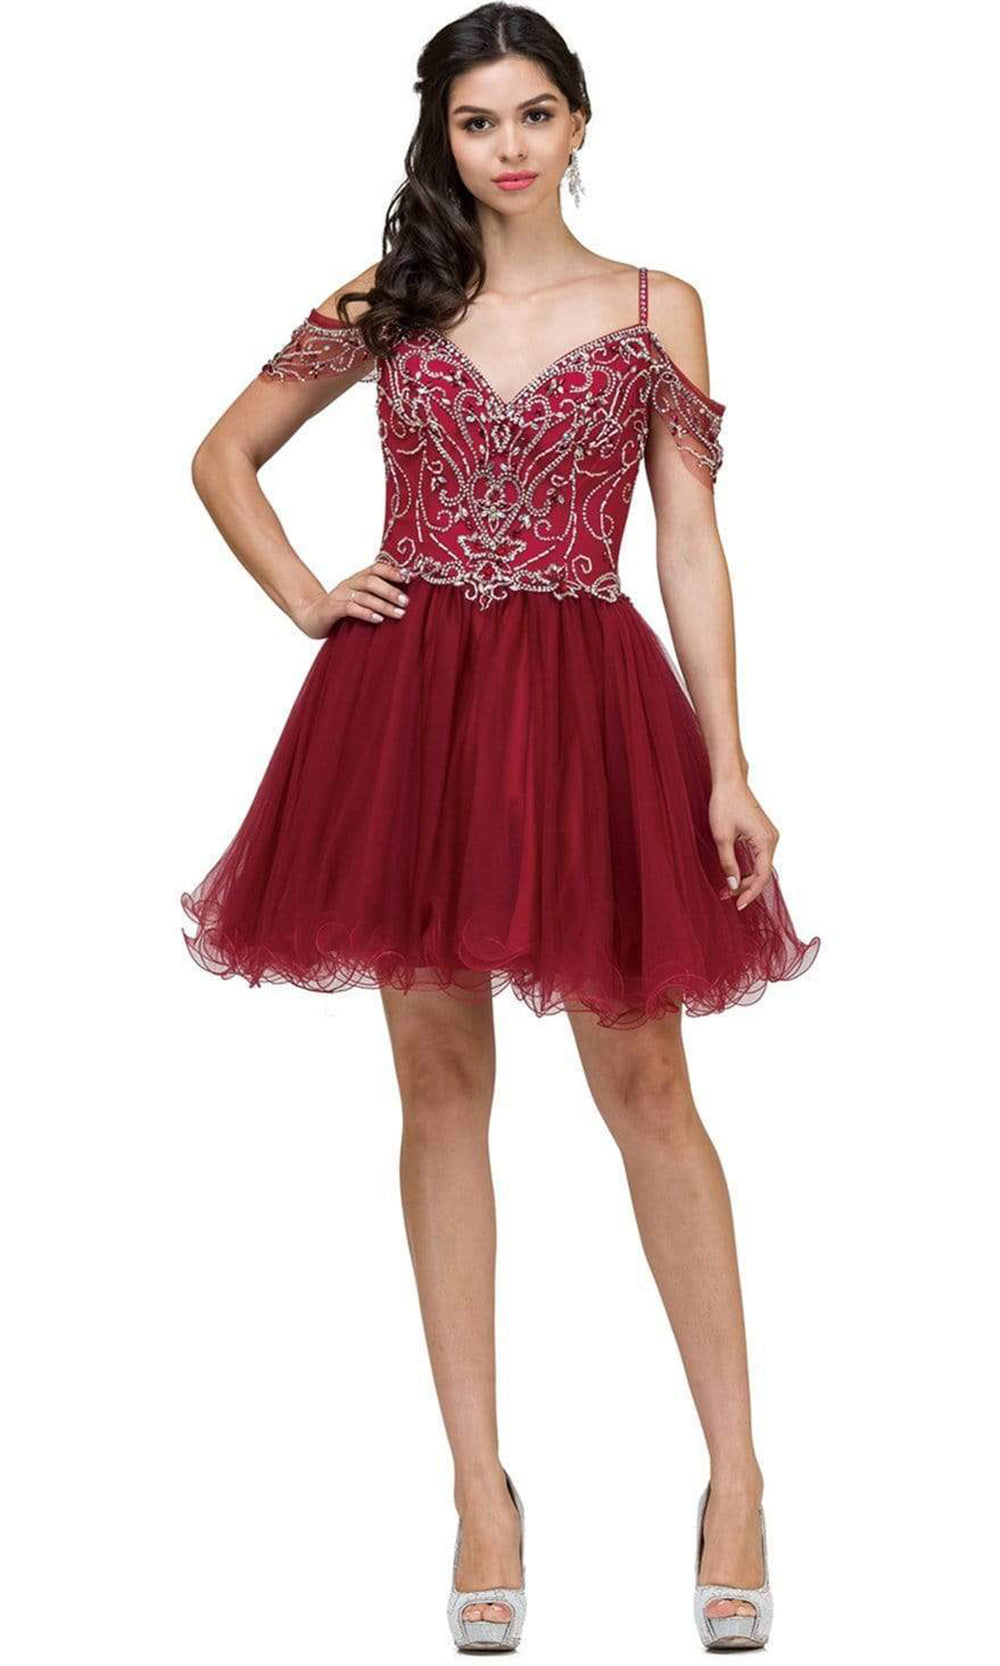 Dancing Queen - Jeweled Off-Shoulder Fit and Flare Cocktail Dress 2023 - 1 pc Burgundy In Size 3XL Available CCSALE 3XL / Burgundy